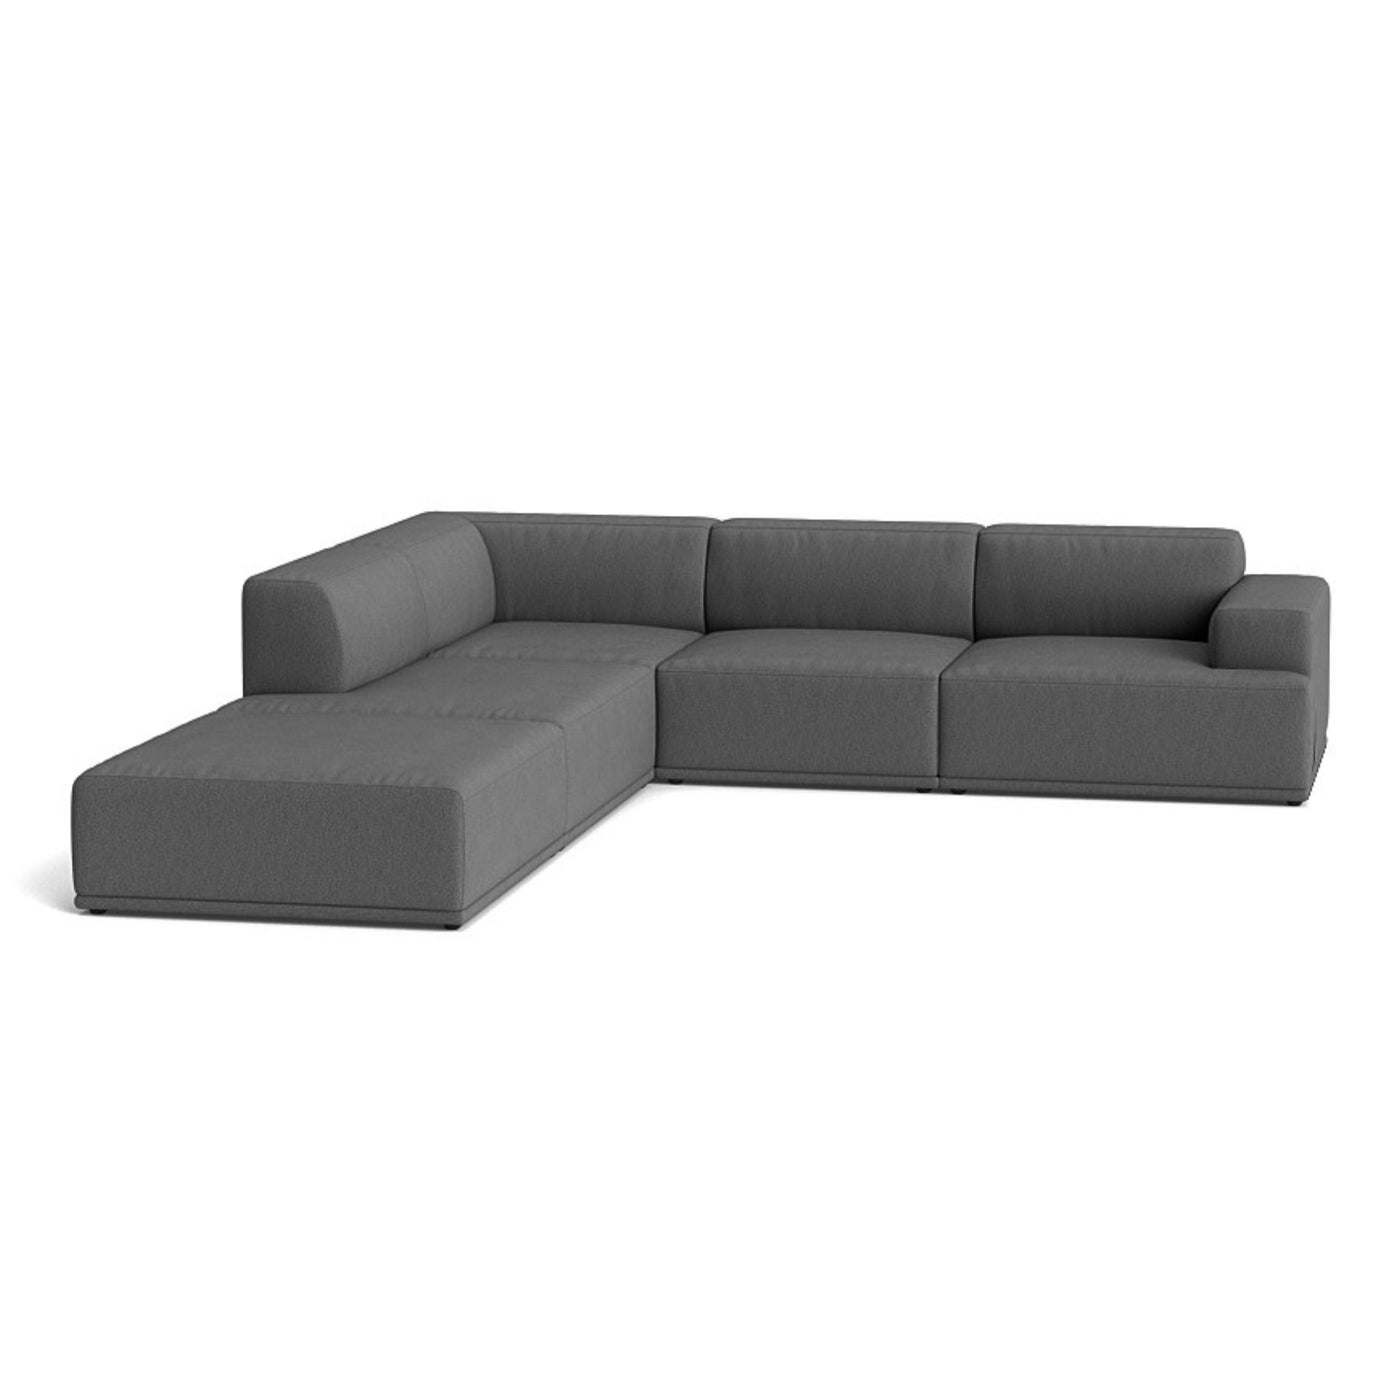 Muuto Connect Soft Modular Corner Sofa, configuration 1. Made-to-order from someday designs. #colour_clay-13